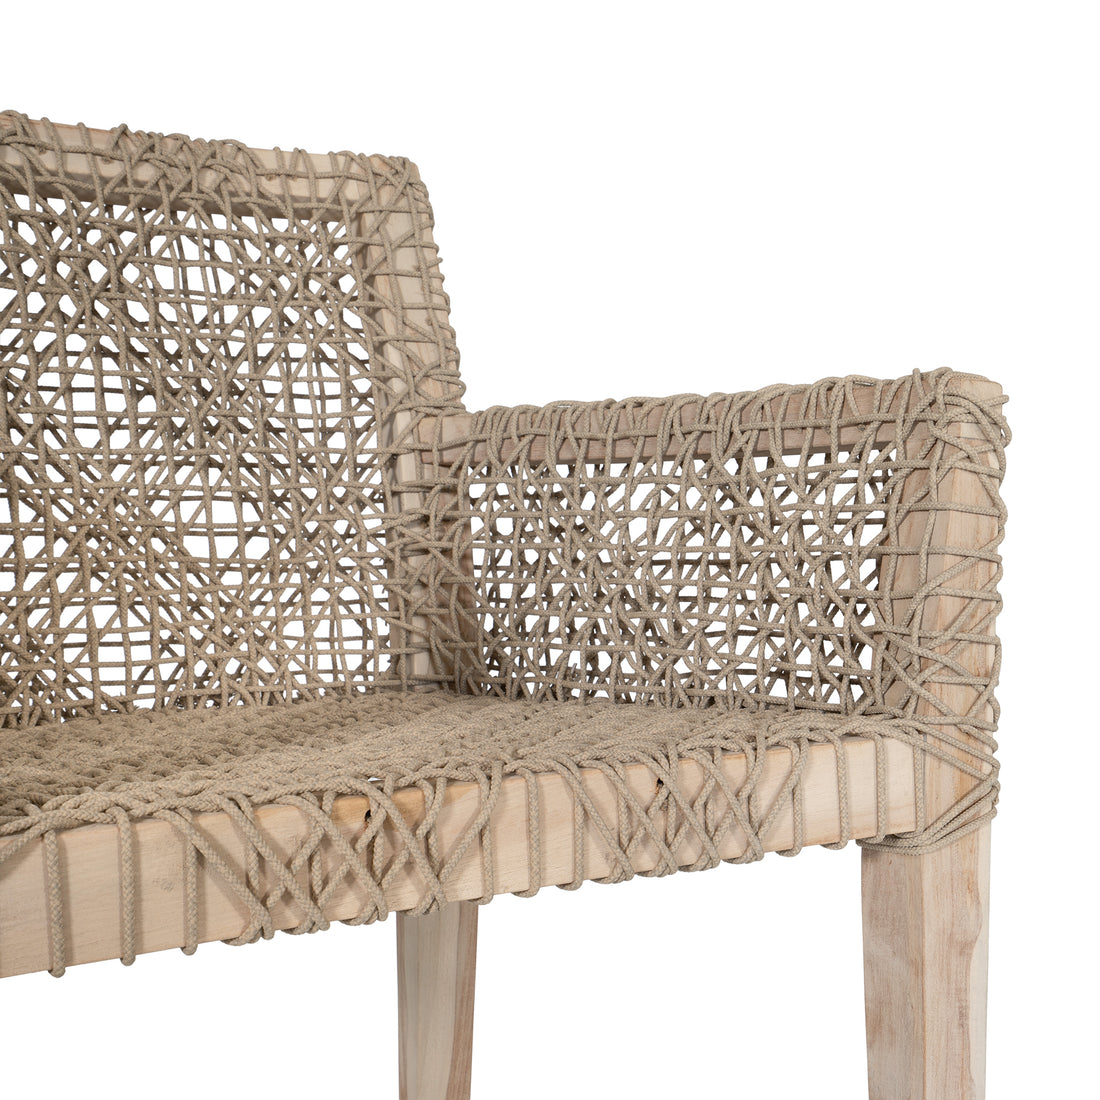 Sweni Armchair | Natural | Rope